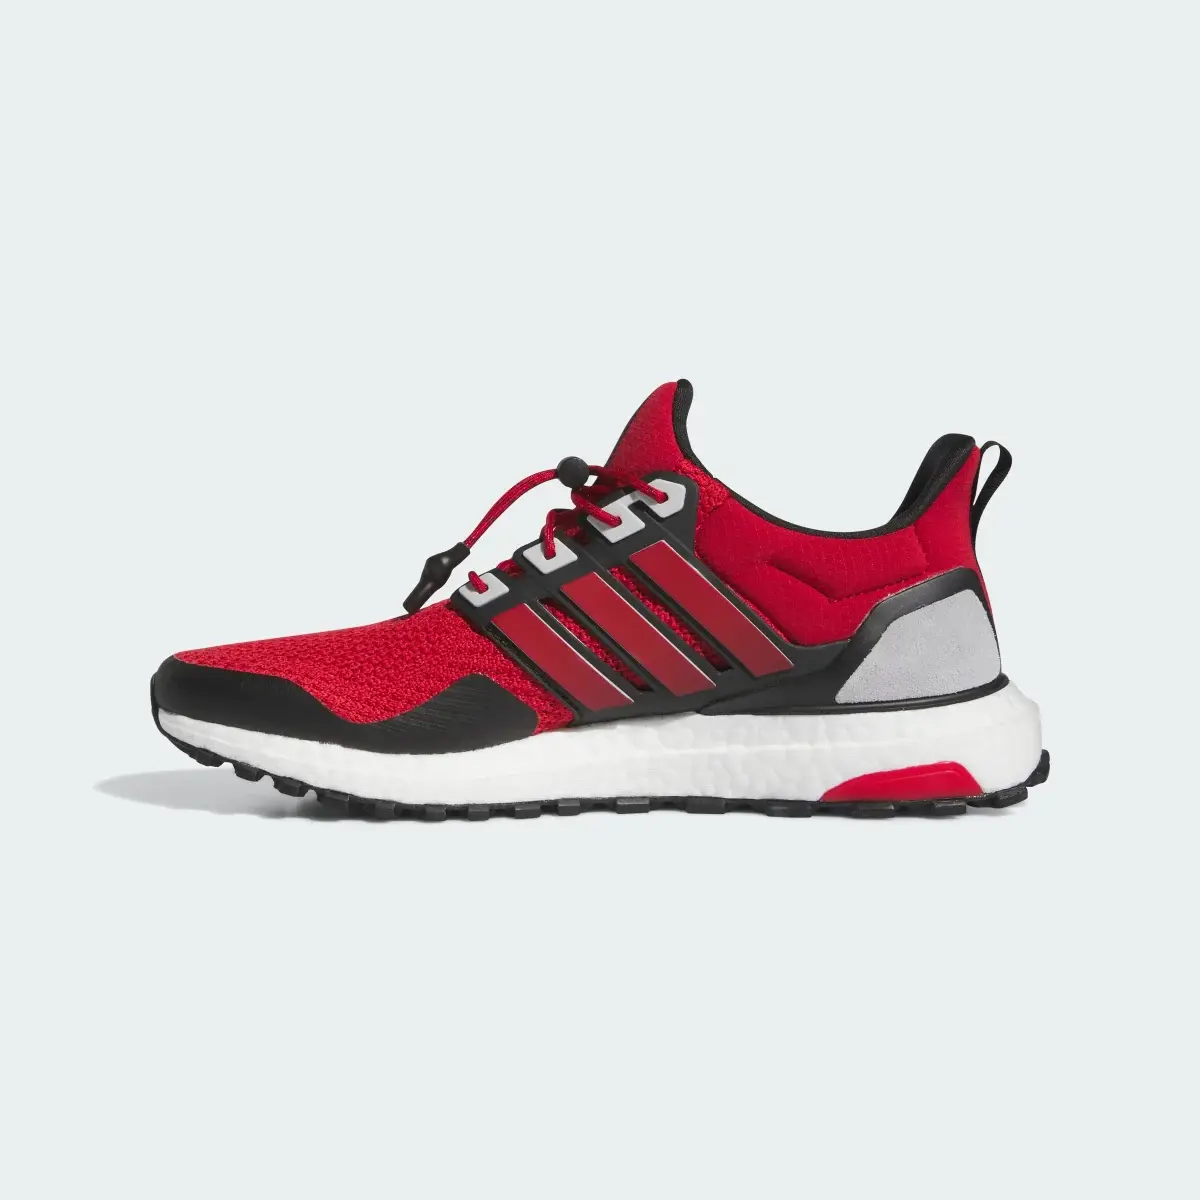 Adidas NC State Ultraboost 1.0 Shoes. 1